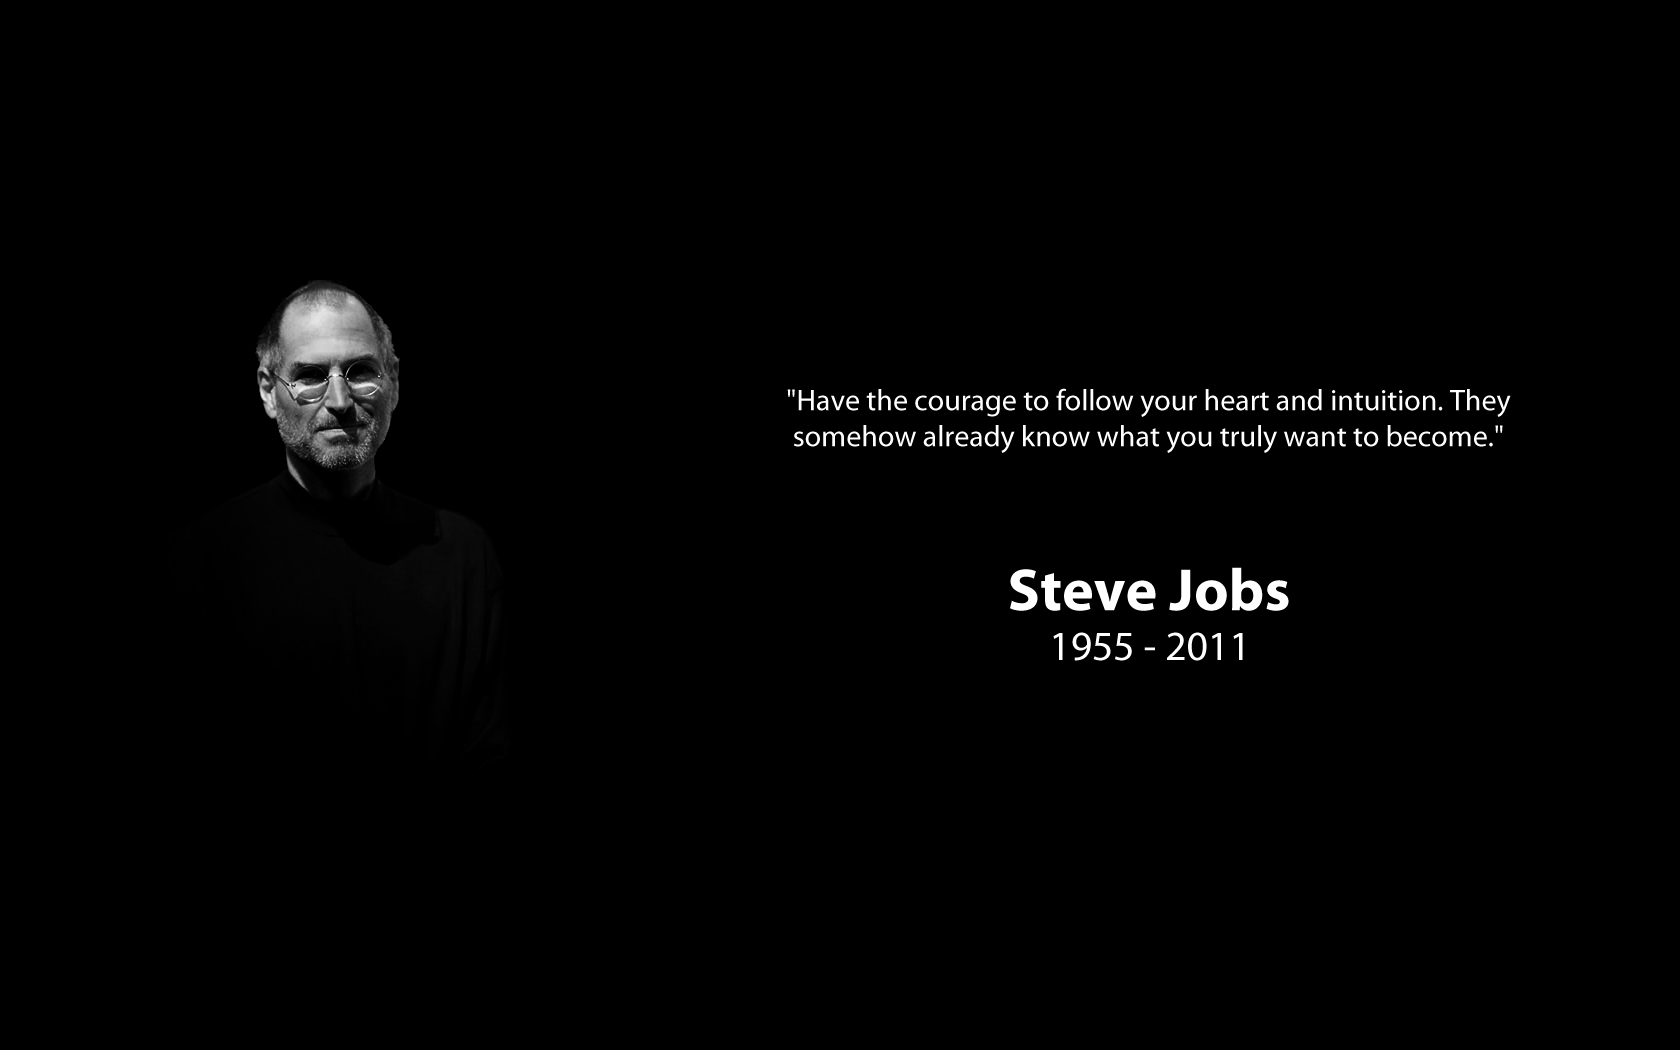 Steve Jobs Quote Wallpaper Heart And Intuition Brightoak